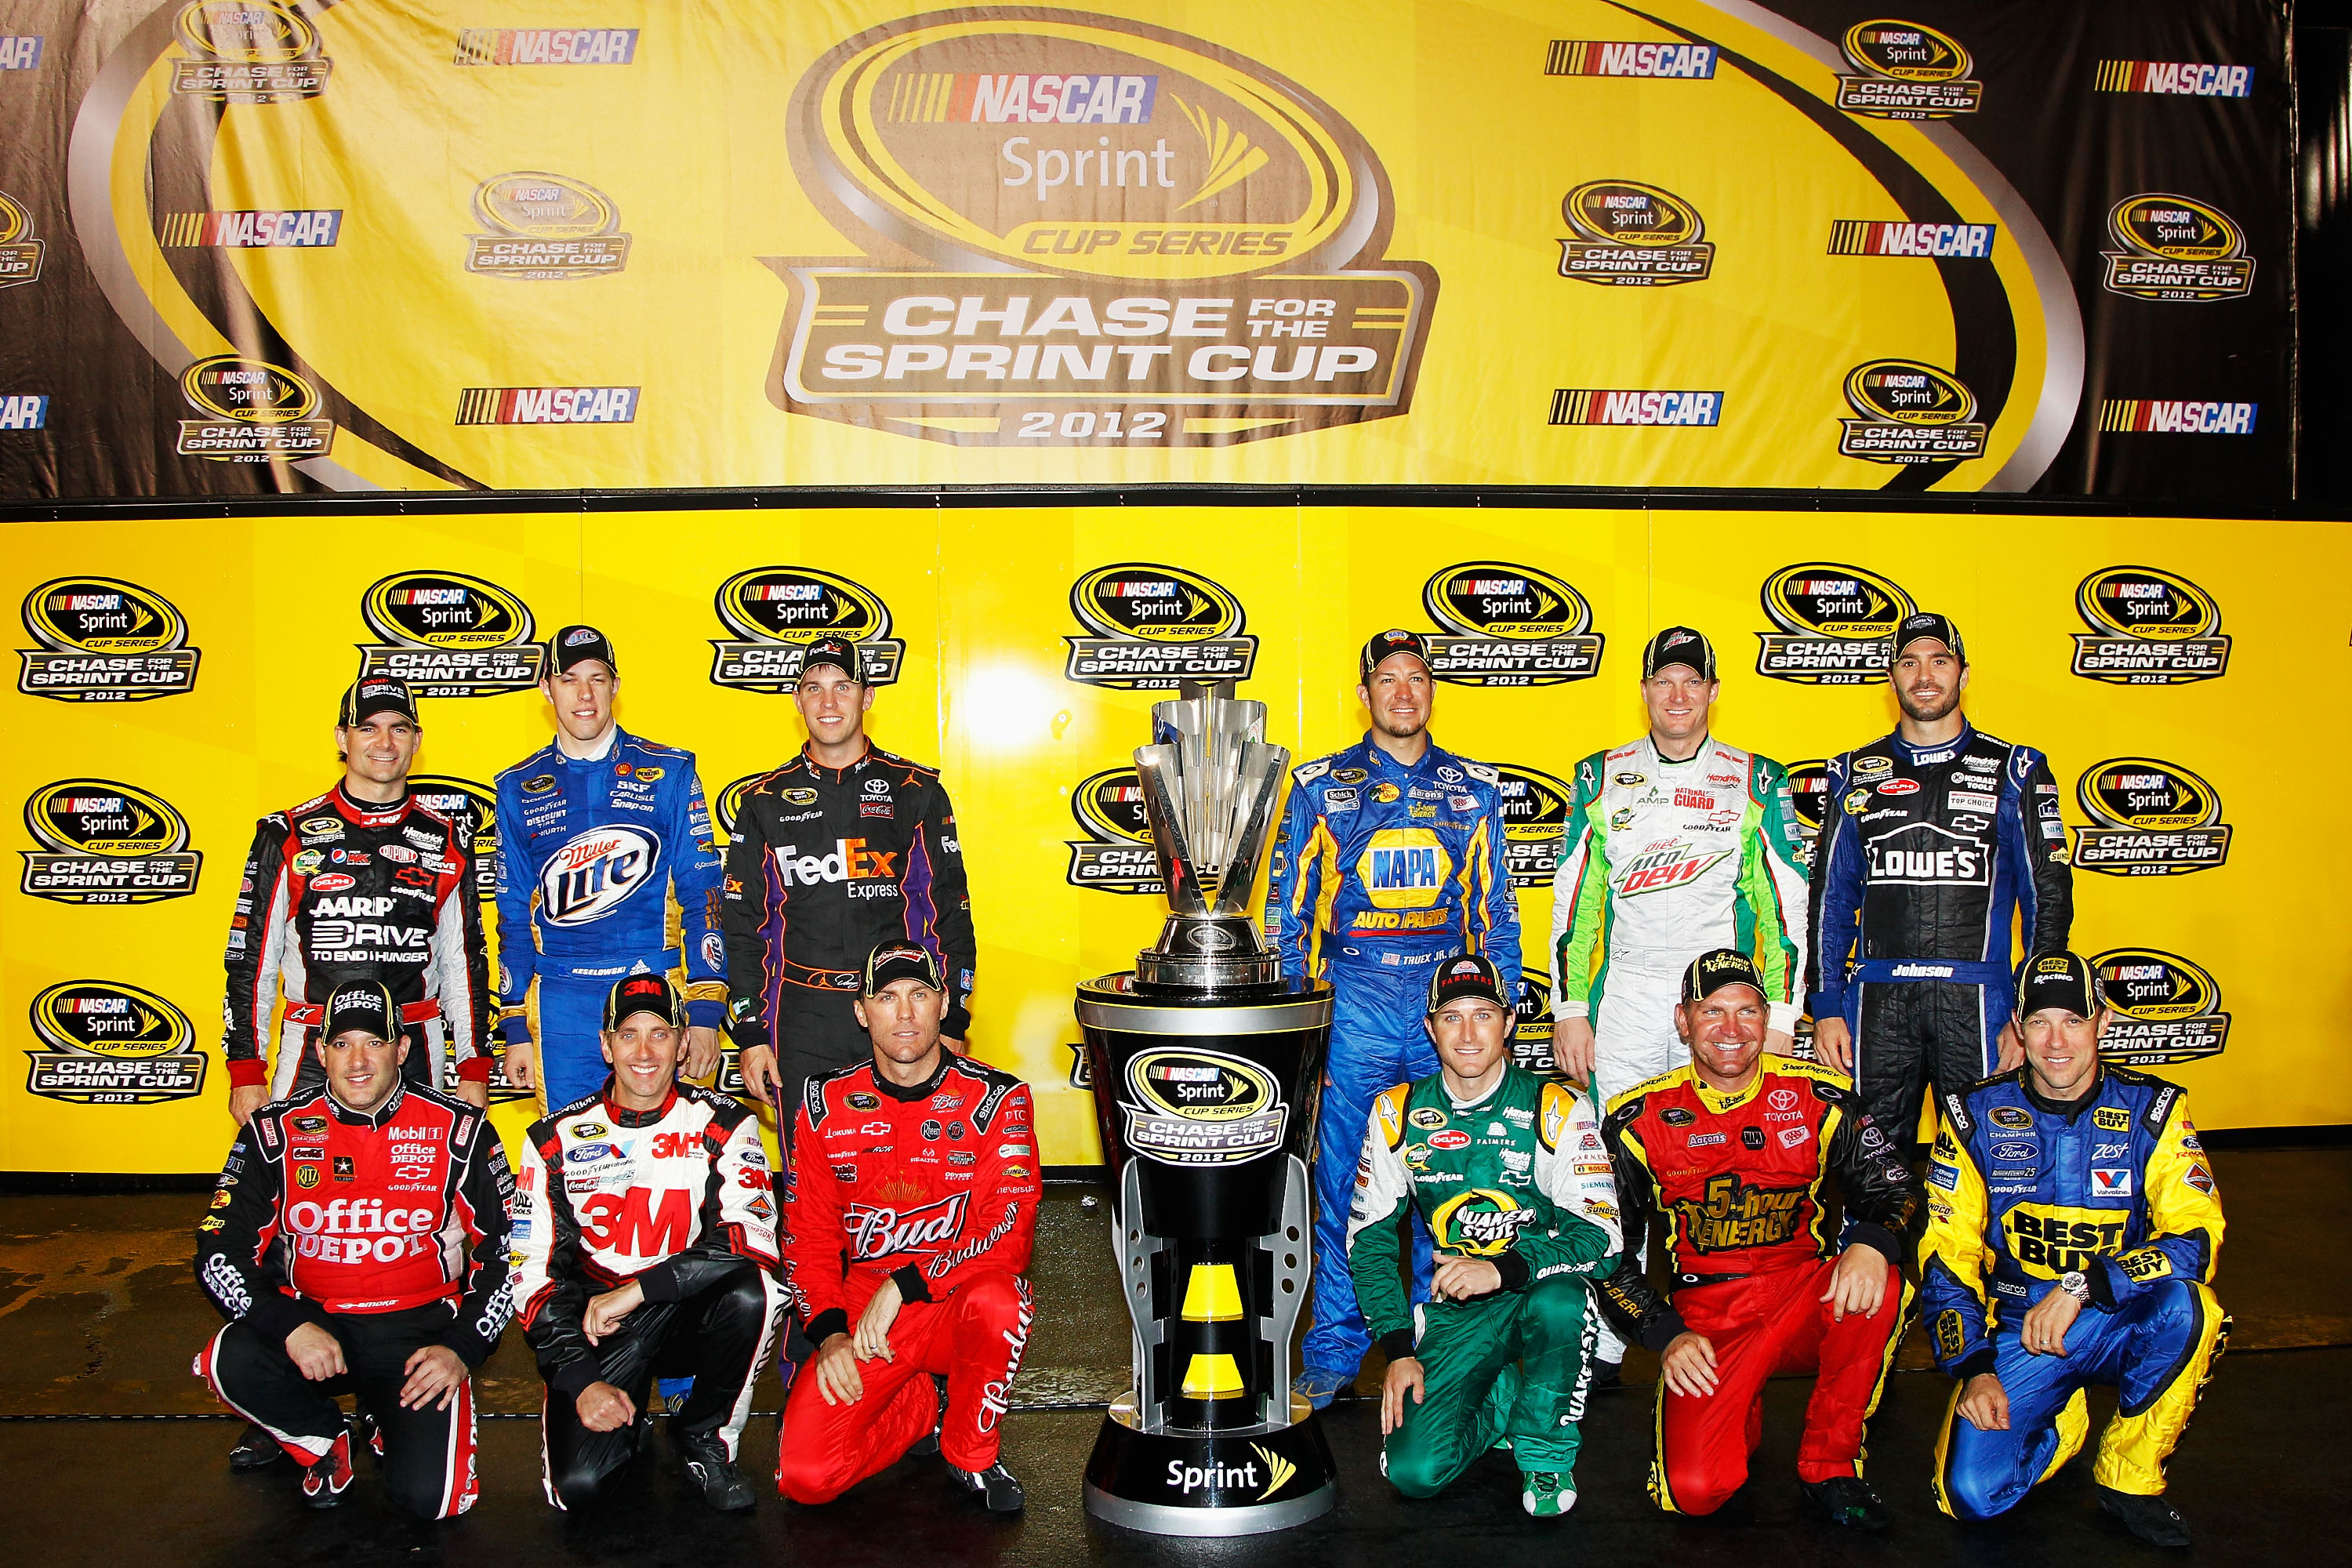 Twelve drivers will have 10 races to determine this year's Sprint Cup Champion.  Who will it be at the end of the season hoisting the checkered flag trophy?